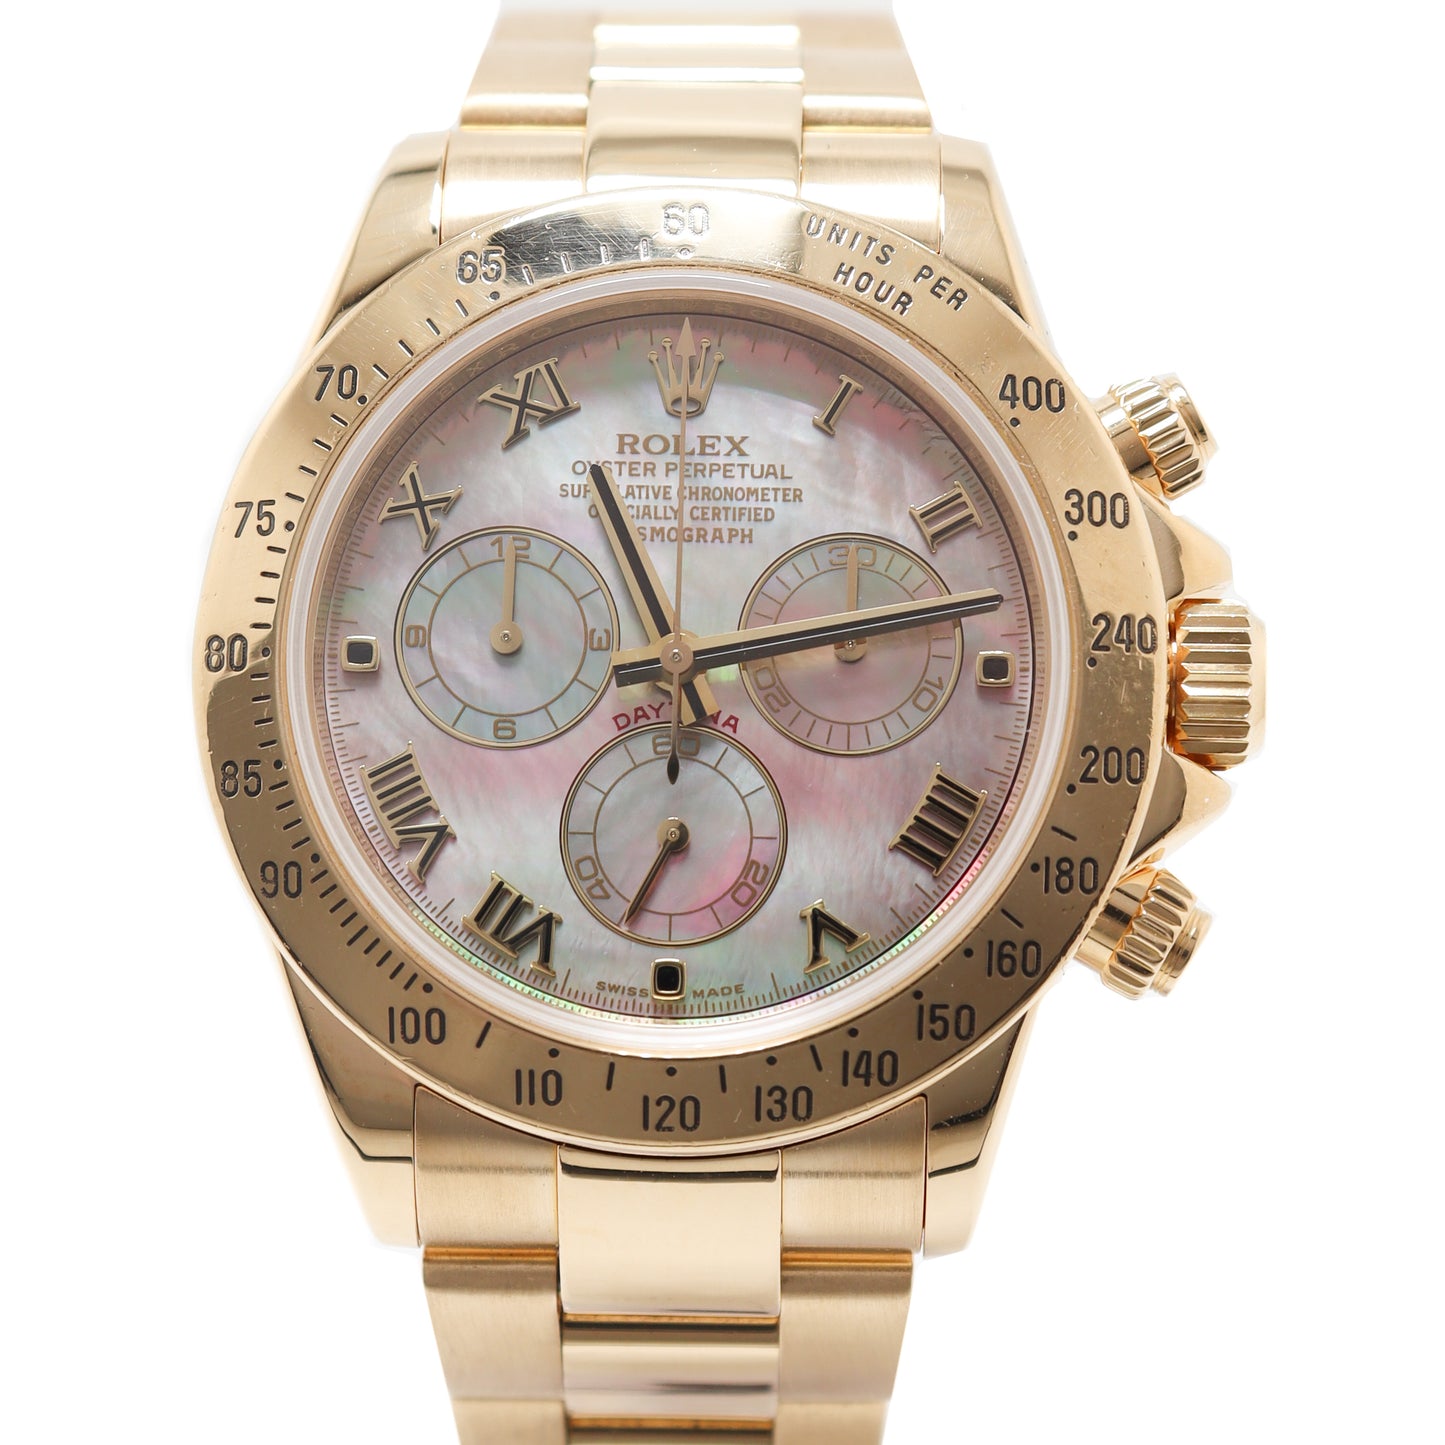 Load image into Gallery viewer, Rolex Mens Daytona Yellow Gold Dark MOP Roman Chronograph Dial Watch Reference# 116528 - Happy Jewelers Fine Jewelry Lifetime Warranty
